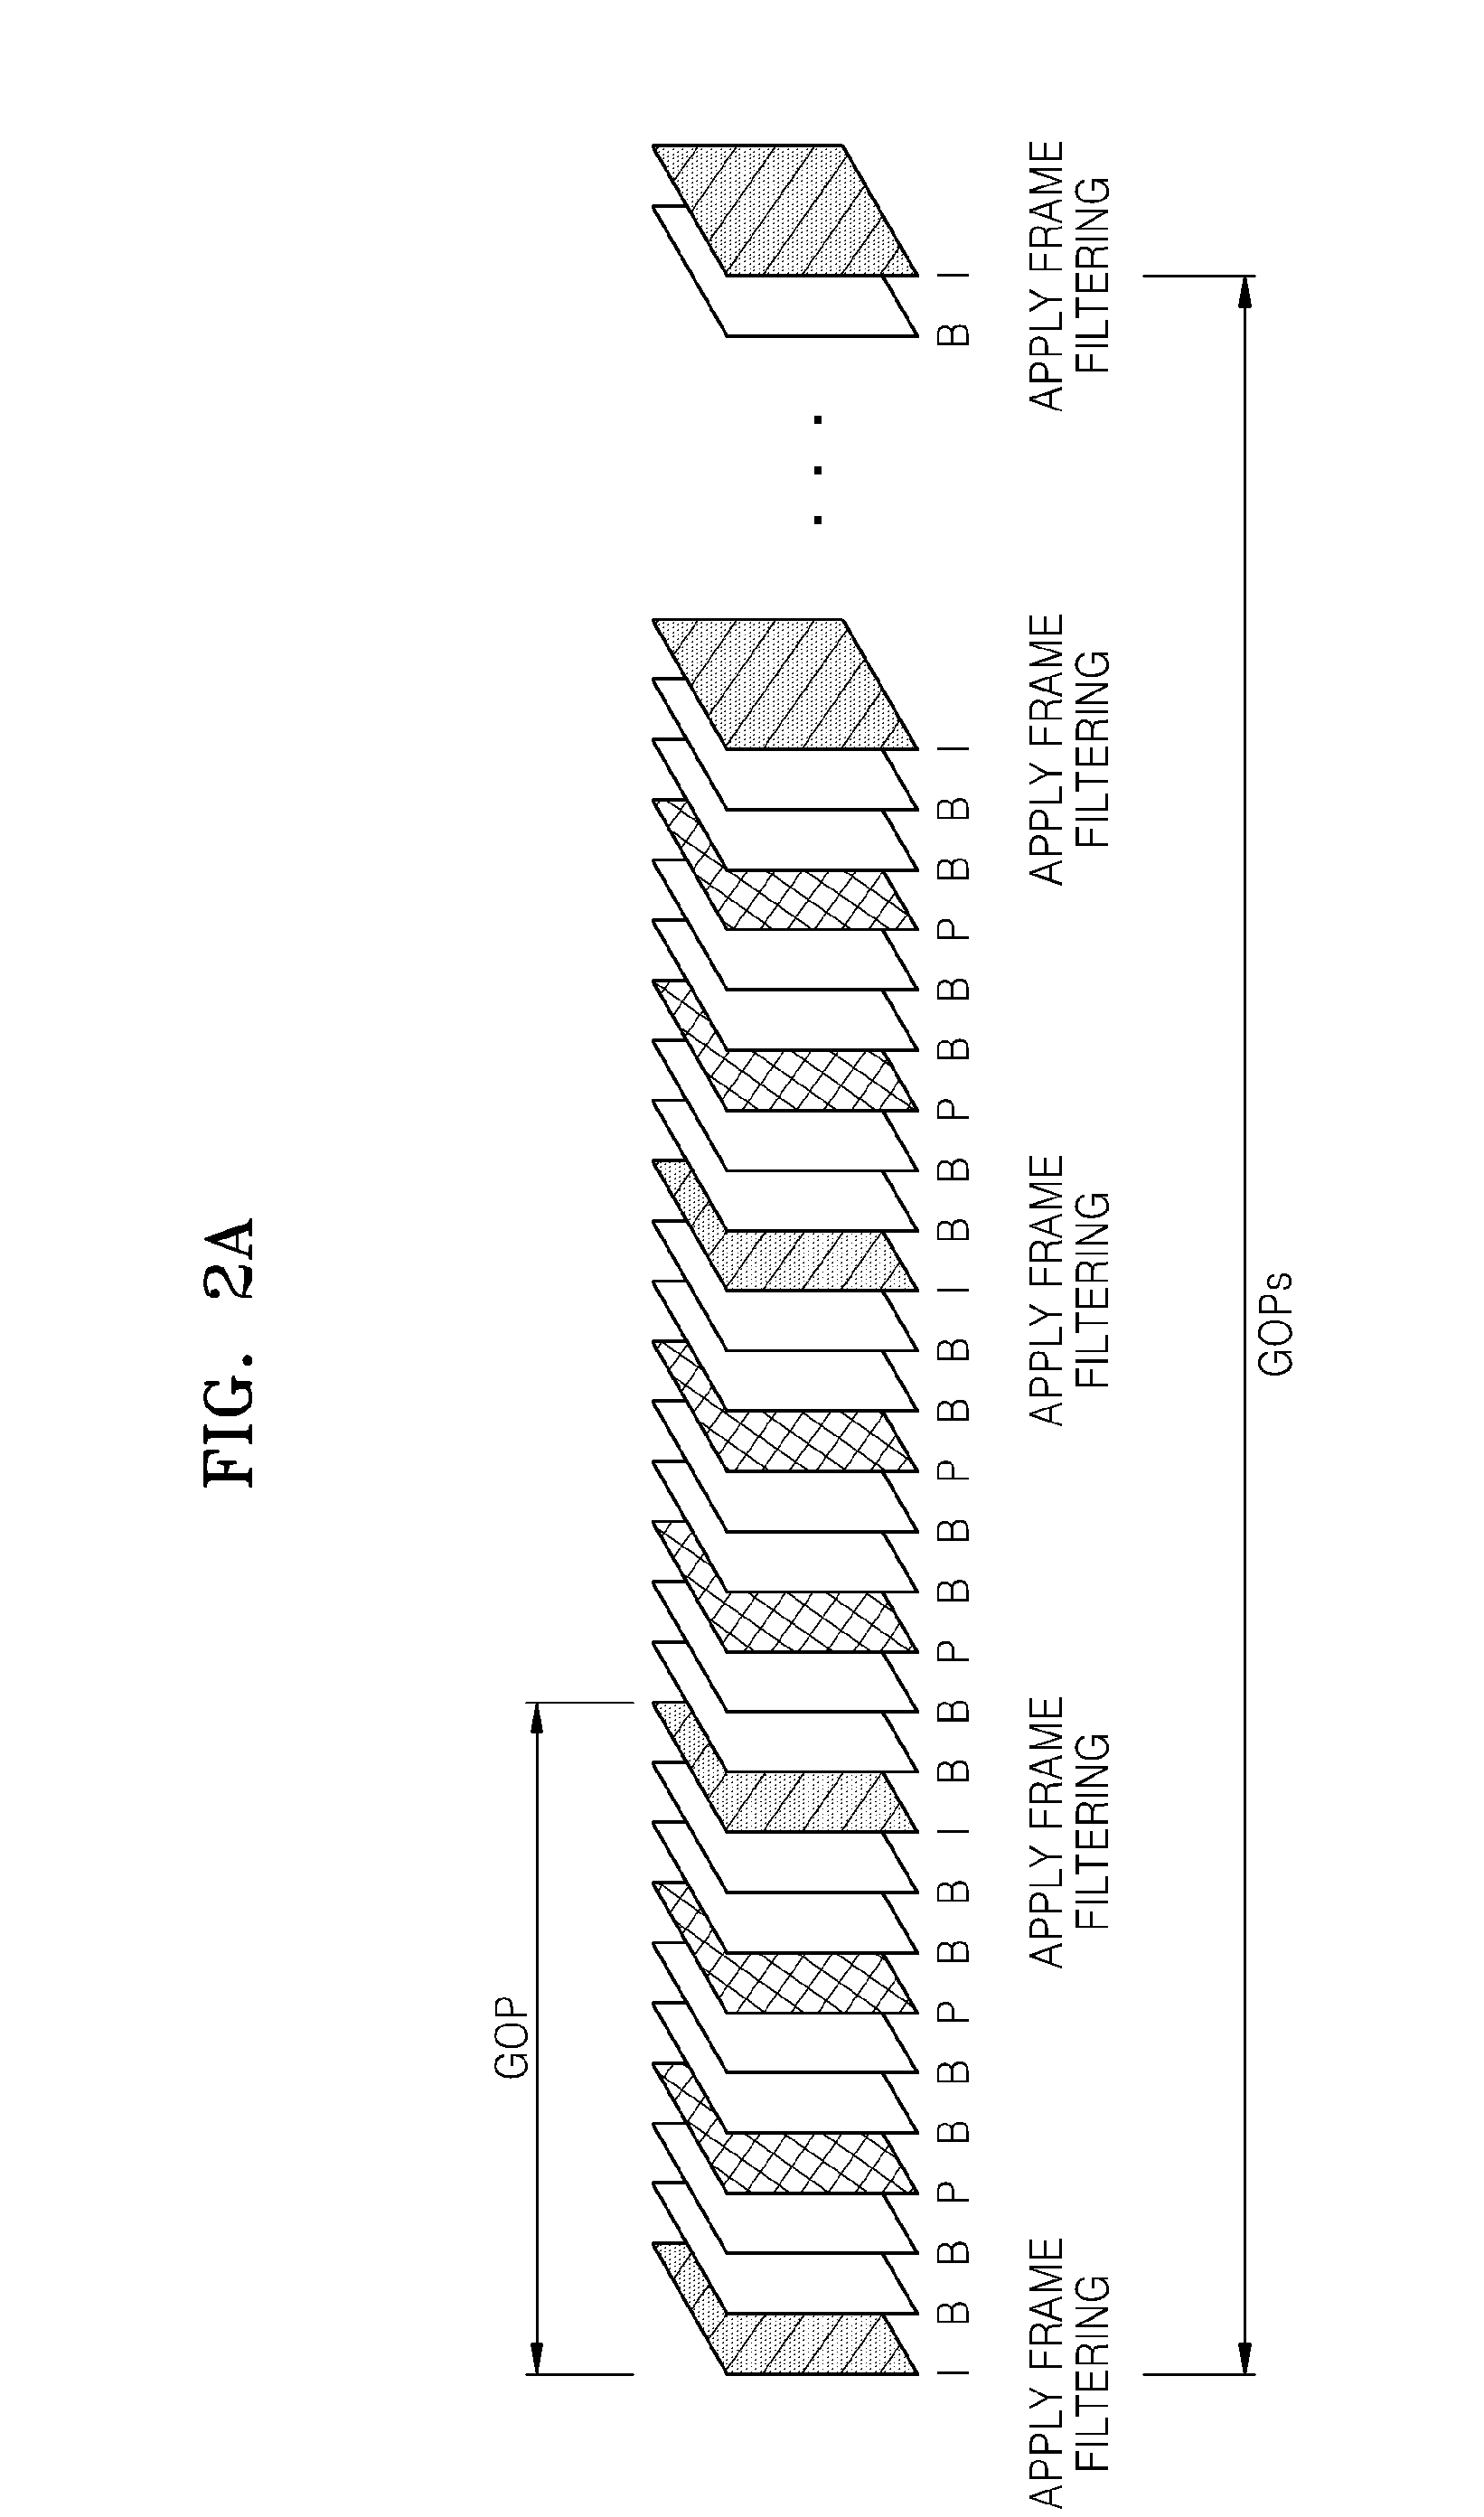 Apparatus and method for processing images